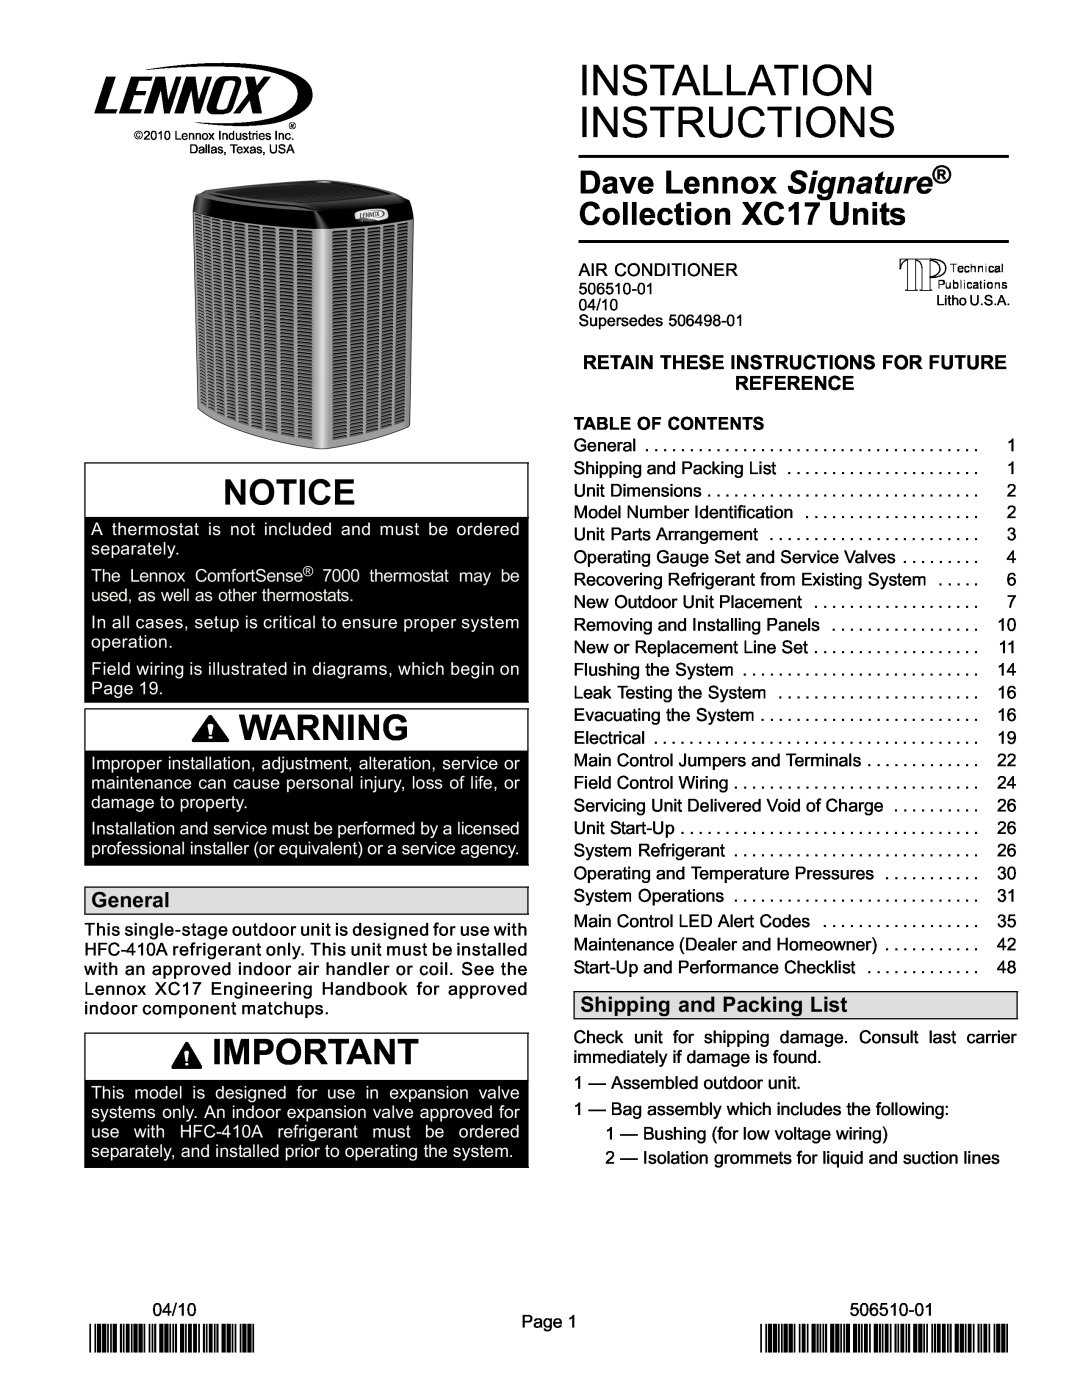 Lennox International Inc Dave Lennox Signature Collection XC17 Air Conditioner installation instructions 2P0410, General 